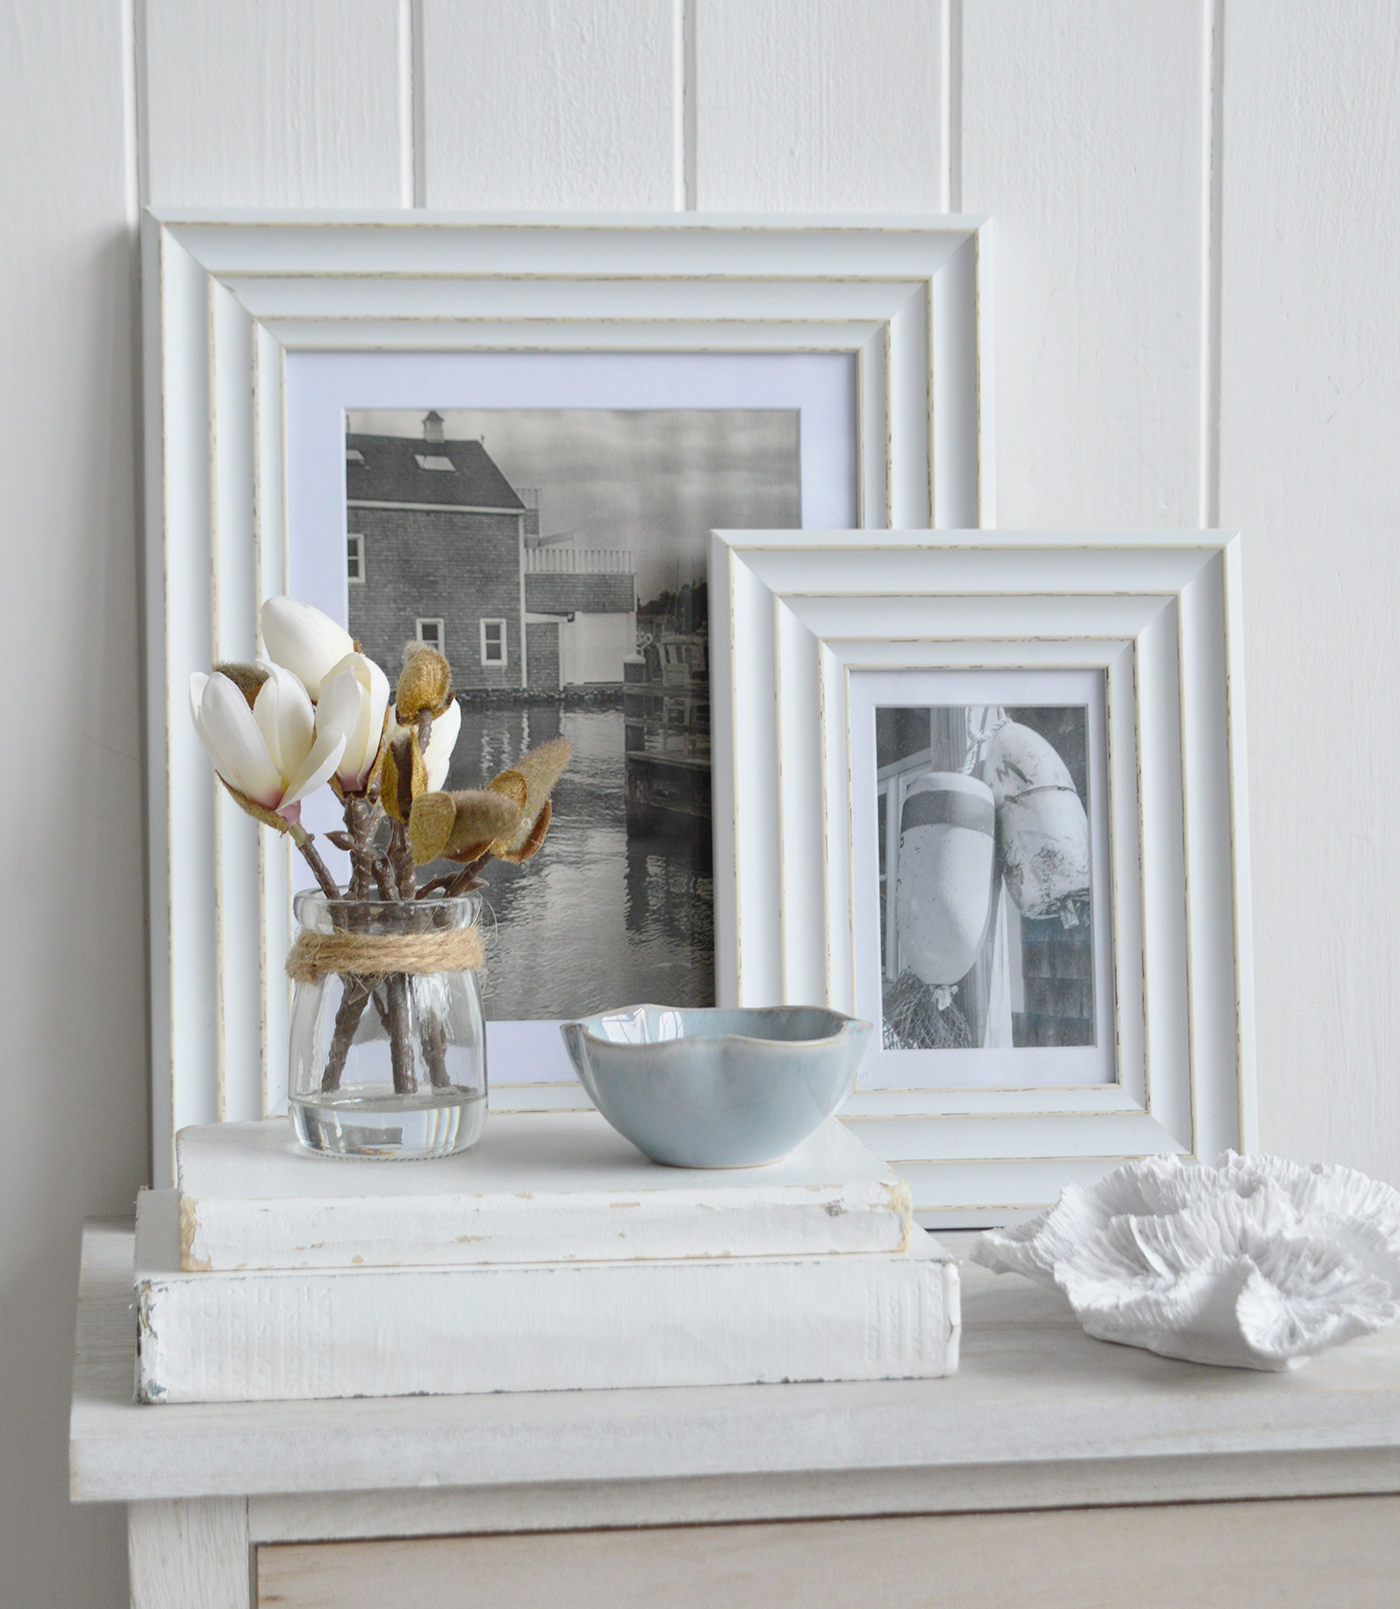 Hamptons beachhouse inspired coastl interiors with hints of white and blkue, faux coral and a Magnolia Sprig